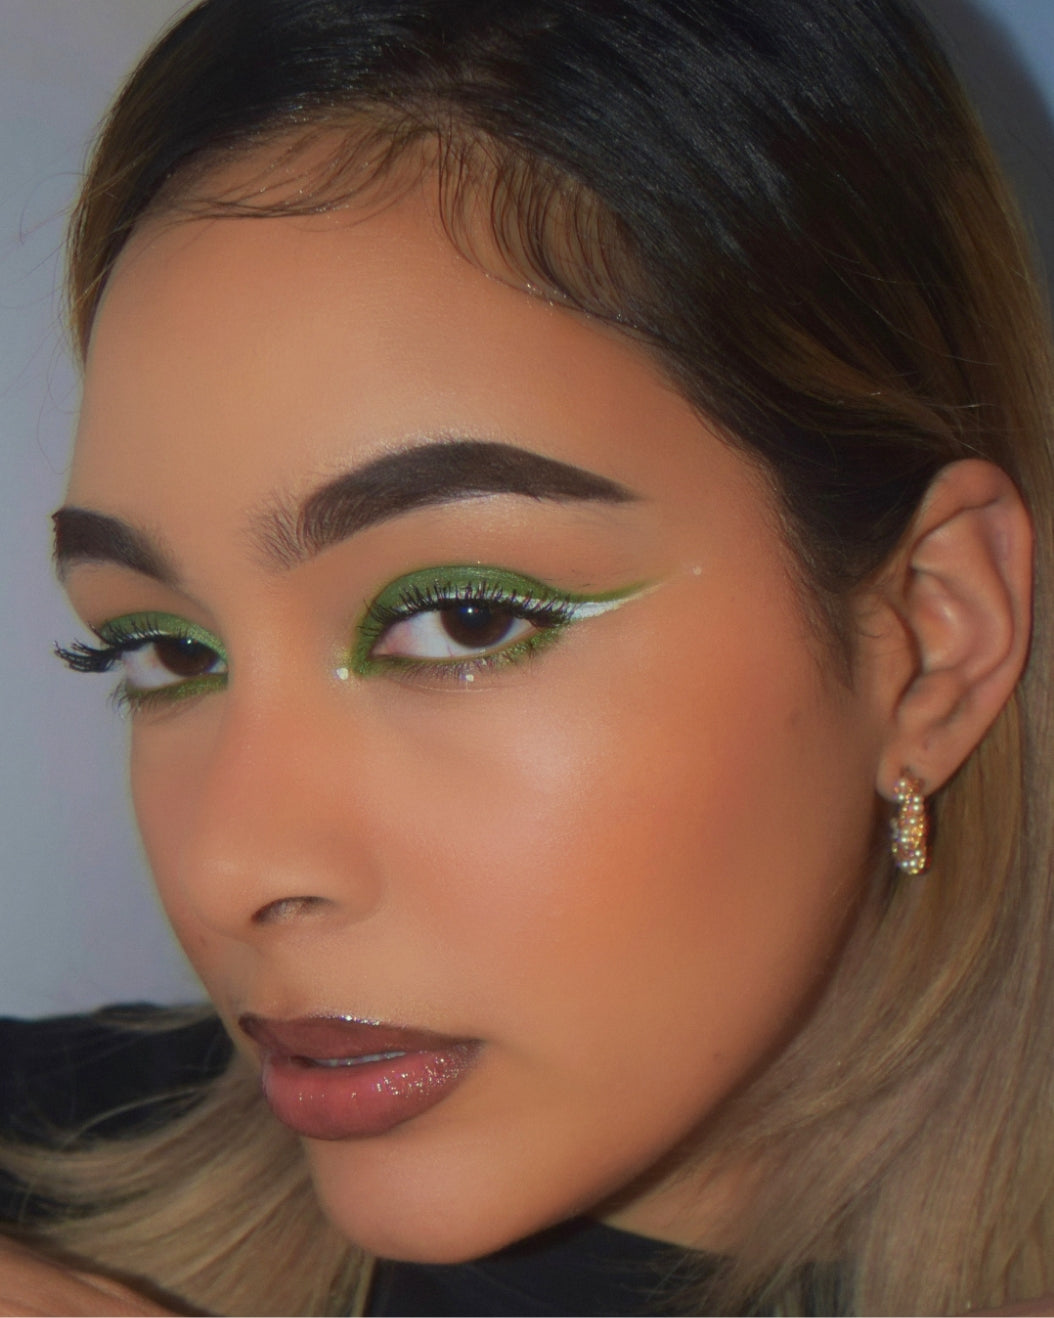 Makeup artist wears a matcha latte-inspired makeup look with vibrant green eyeshadow and light green winged eyeliner